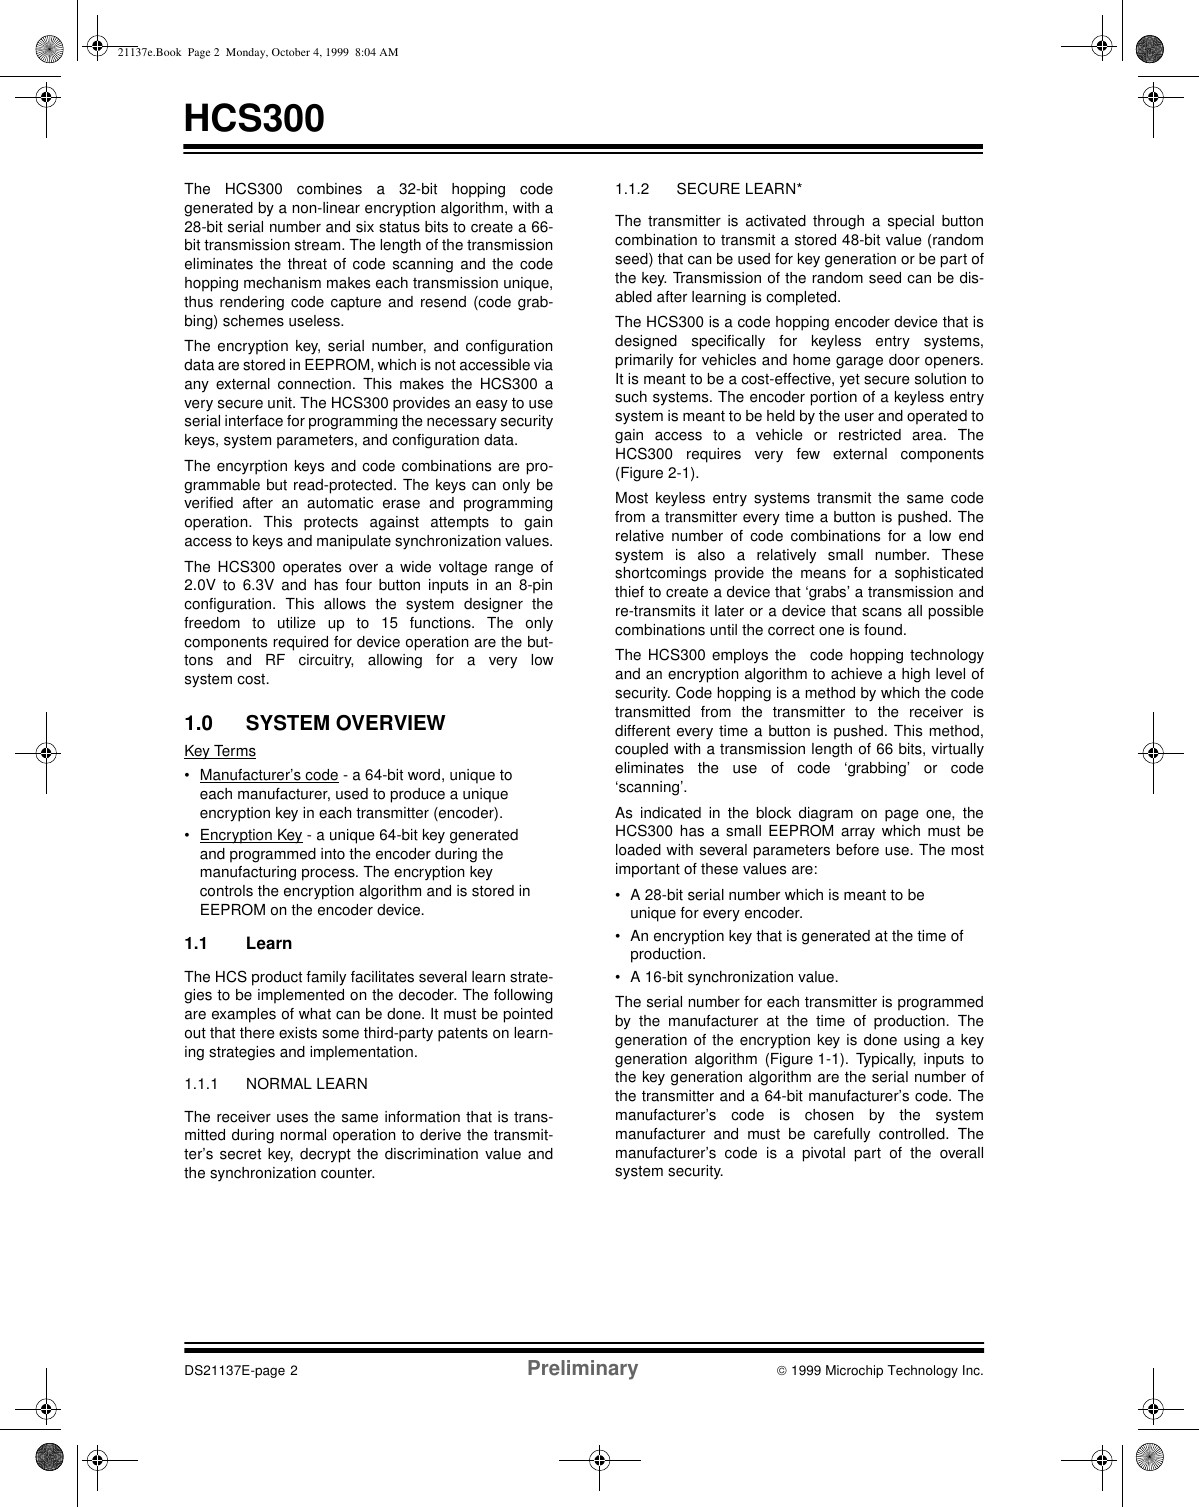 HCS300DS21137E-page 2 Preliminary  1999 Microchip Technology Inc.The HCS300 combines a 32-bit hopping codegenerated by a non-linear encryption algorithm, with a28-bit serial number and six status bits to create a 66-bit transmission stream. The length of the transmissioneliminates the threat of code scanning and the codehopping mechanism makes each transmission unique,thus rendering code capture and resend (code grab-bing) schemes useless.The encryption key, serial number, and configurationdata are stored in EEPROM, which is not accessible viaany external connection. This makes the HCS300 avery secure unit. The HCS300 provides an easy to useserial interface for programming the necessary securitykeys, system parameters, and configuration data.The encyrption keys and code combinations are pro-grammable but read-protected. The keys can only beverified after an automatic erase and programmingoperation. This protects against attempts to gainaccess to keys and manipulate synchronization values.The HCS300 operates over a wide voltage range of2.0V to 6.3V and has four button inputs in an 8-pinconfiguration. This allows the system designer thefreedom to utilize up to 15 functions. The onlycomponents required for device operation are the but-tons and RF circuitry, allowing for a very lowsystem cost.1.0 SYSTEM OVERVIEWKey Terms• Manufacturer’s code - a 64-bit word, unique to each manufacturer, used to produce a unique encryption key in each transmitter (encoder).• Encryption Key - a unique 64-bit key generated and programmed into the encoder during the manufacturing process. The encryption key controls the encryption algorithm and is stored in EEPROM on the encoder device.1.1 Learn The HCS product family facilitates several learn strate-gies to be implemented on the decoder. The followingare examples of what can be done. It must be pointedout that there exists some third-party patents on learn-ing strategies and implementation.1.1.1 NORMAL LEARNThe receiver uses the same information that is trans-mitted during normal operation to derive the transmit-ter’s secret key, decrypt the discrimination value andthe synchronization counter.1.1.2 SECURE LEARN*The transmitter is activated through a special buttoncombination to transmit a stored 48-bit value (randomseed) that can be used for key generation or be part ofthe key. Transmission of the random seed can be dis-abled after learning is completed.The HCS300 is a code hopping encoder device that isdesigned specifically for keyless entry systems,primarily for vehicles and home garage door openers.It is meant to be a cost-effective, yet secure solution tosuch systems. The encoder portion of a keyless entrysystem is meant to be held by the user and operated togain access to a vehicle or restricted area. TheHCS300 requires very few external components(Figure 2-1).Most keyless entry systems transmit the same codefrom a transmitter every time a button is pushed. Therelative number of code combinations for a low endsystem is also a relatively small number. Theseshortcomings provide the means for a sophisticatedthief to create a device that ‘grabs’ a transmission andre-transmits it later or a device that scans all possiblecombinations until the correct one is found.The HCS300 employs the  code hopping technologyand an encryption algorithm to achieve a high level ofsecurity. Code hopping is a method by which the codetransmitted from the transmitter to the receiver isdifferent every time a button is pushed. This method,coupled with a transmission length of 66 bits, virtuallyeliminates the use of code ‘grabbing’ or code‘scanning’.As indicated in the block diagram on page one, theHCS300 has a small EEPROM array which must beloaded with several parameters before use. The mostimportant of these values are:• A 28-bit serial number which is meant to be unique for every encoder.• An encryption key that is generated at the time of production.• A 16-bit synchronization value.The serial number for each transmitter is programmedby the manufacturer at the time of production. Thegeneration of the encryption key is done using a keygeneration algorithm (Figure 1-1). Typically, inputs tothe key generation algorithm are the serial number ofthe transmitter and a 64-bit manufacturer’s code. Themanufacturer’s code is chosen by the systemmanufacturer and must be carefully controlled. Themanufacturer’s code is a pivotal part of the overallsystem security.21137e.Book  Page 2  Monday, October 4, 1999  8:04 AM